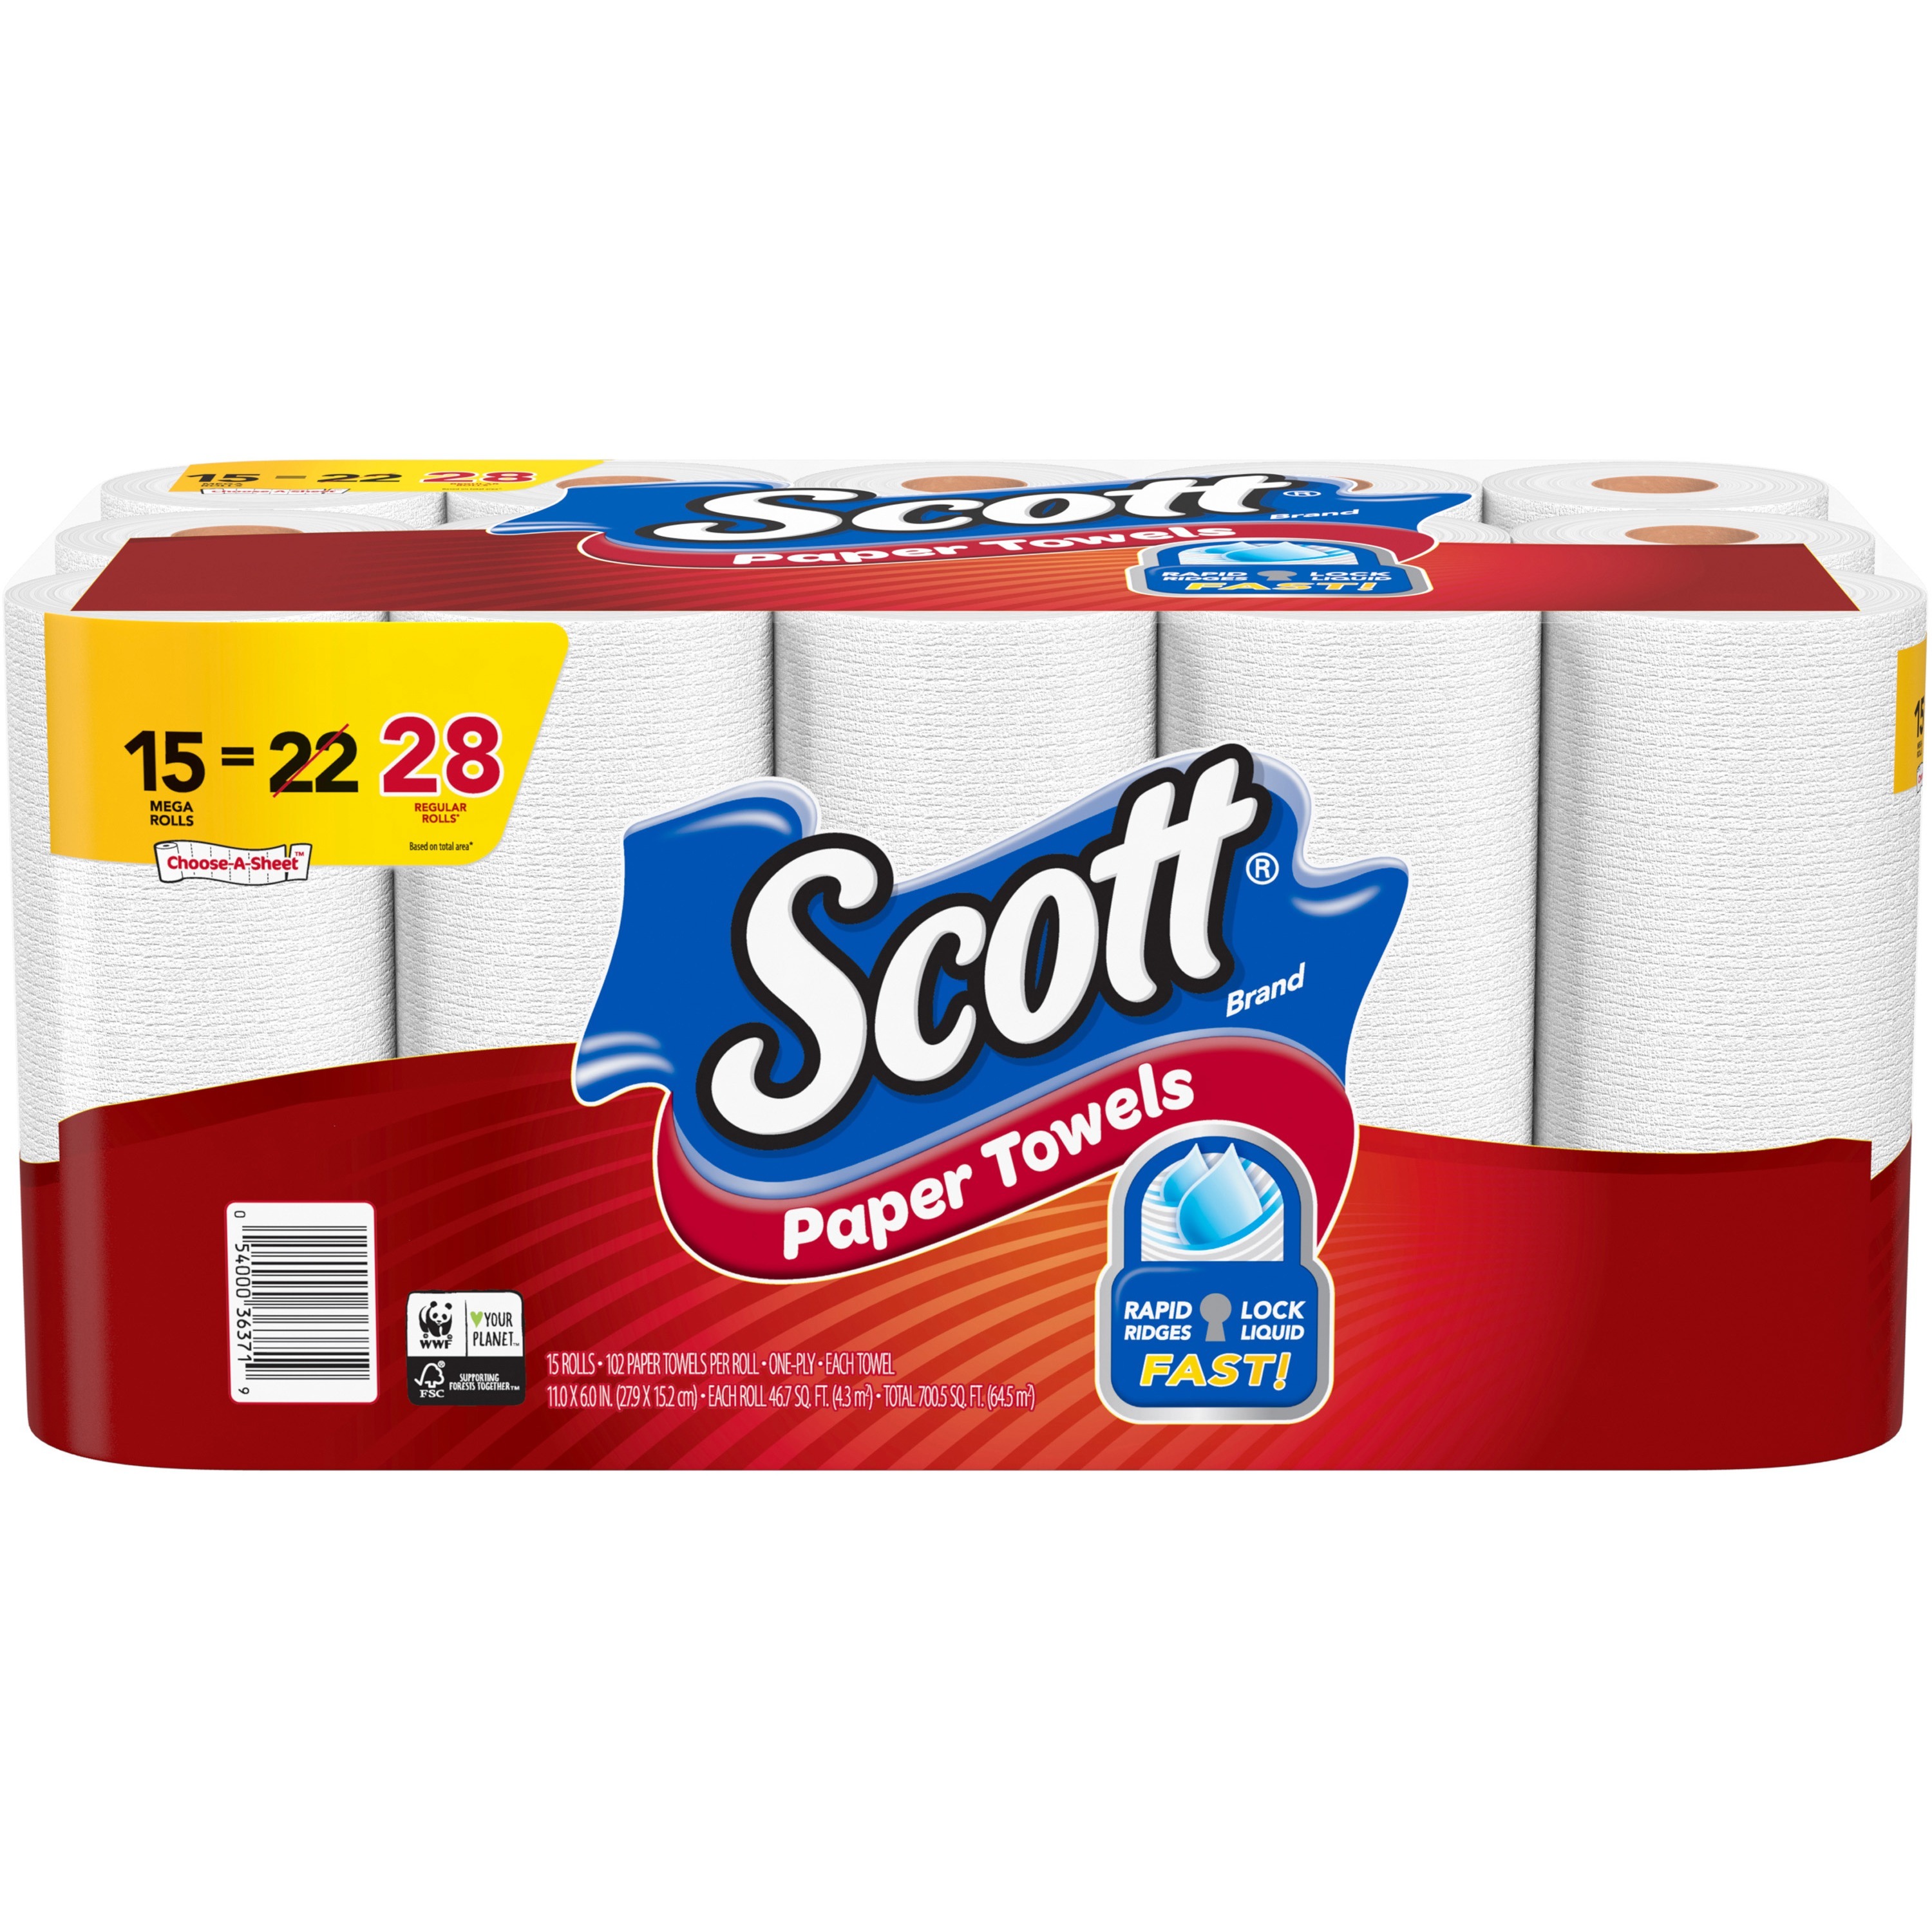 Scott Paper Towels Choose-A-Sheet - Mega Rolls - 1 Ply - 102 Sheets/Roll - White - Perforated, Absorbent, Durable - For Home, Office, School - 30 / Ca